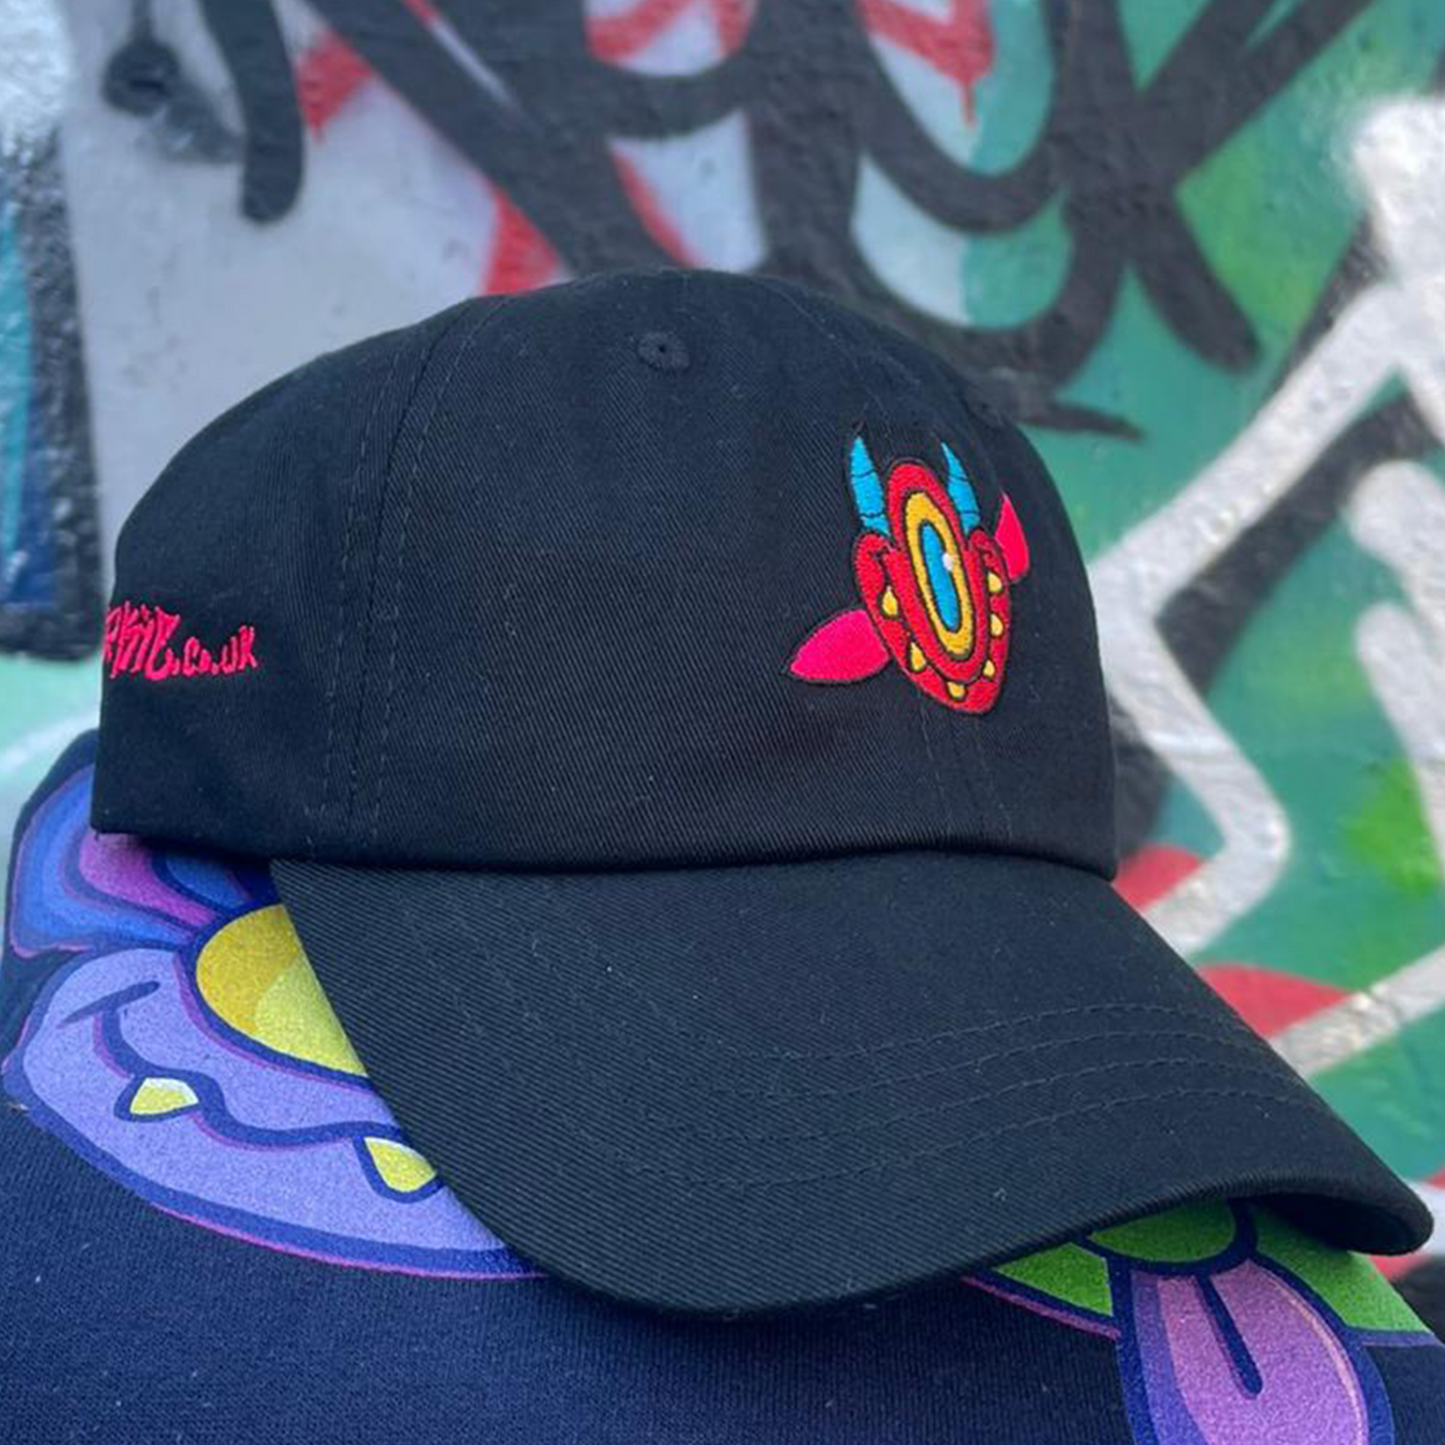 Close up of DiABLO graffiti style hat, with ah character on the front and tag on the side.